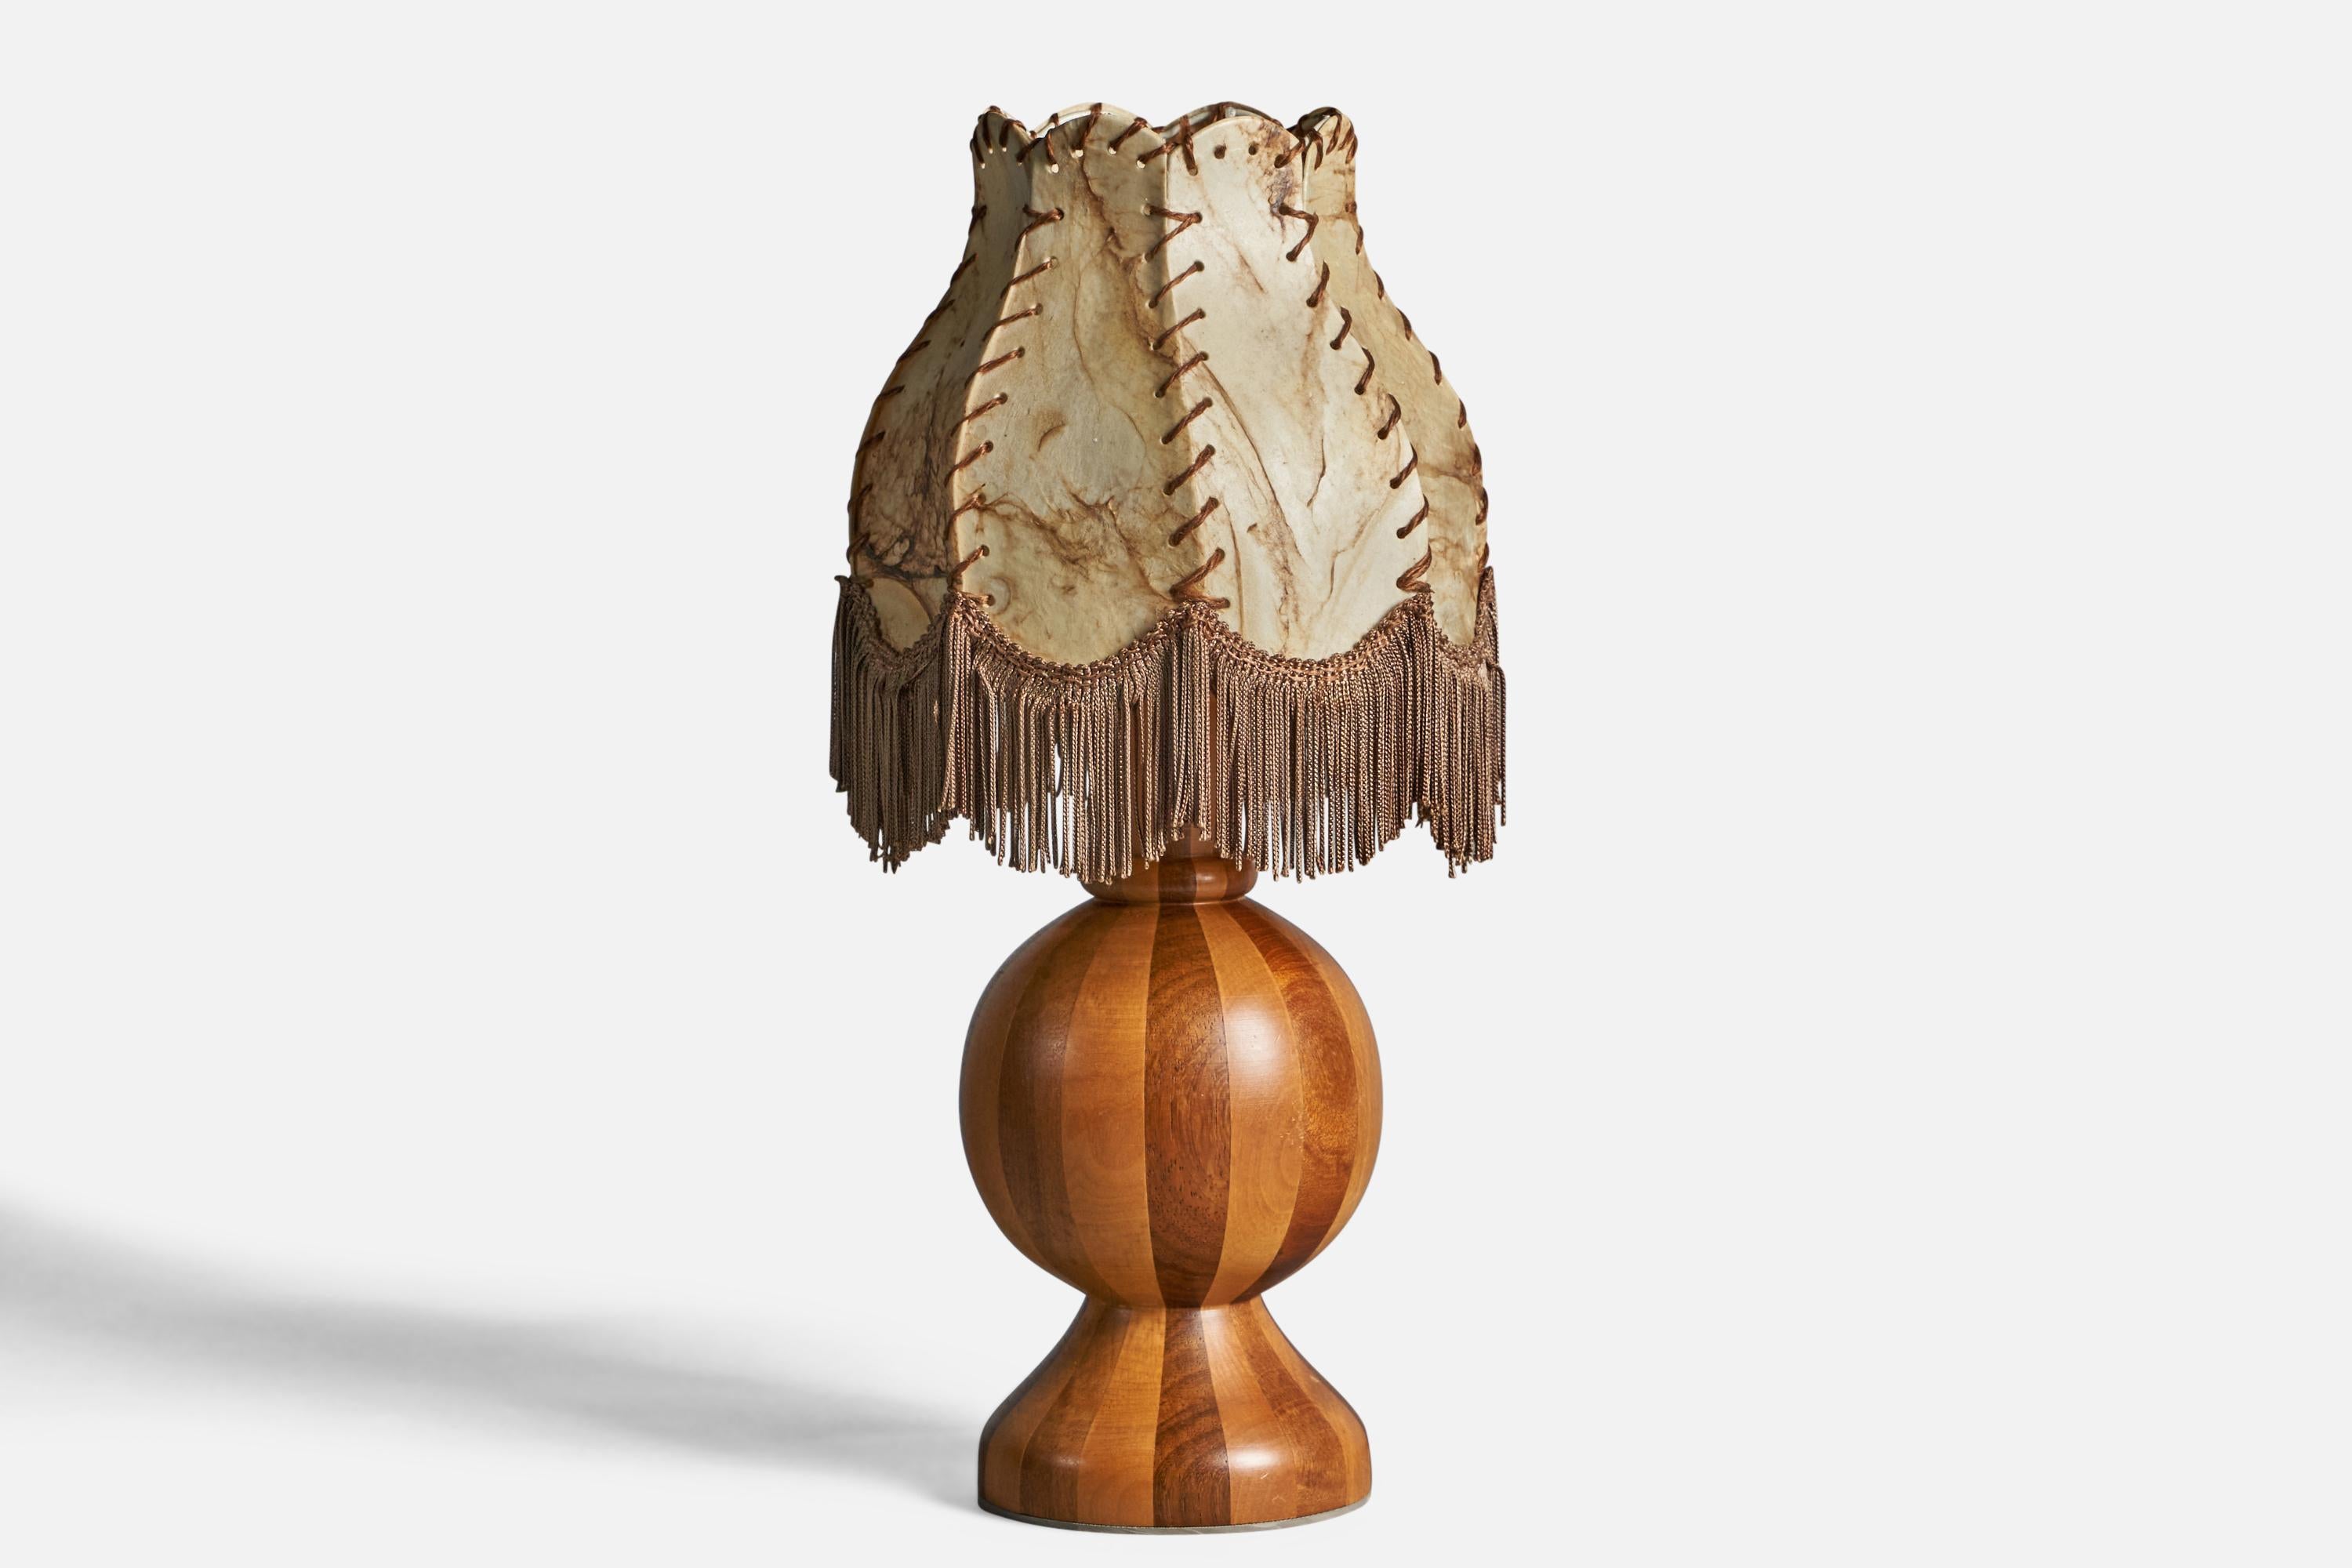 A stack-laminated wood, fabric string and beige parchment paper table lamp, designed and produced in Sweden, c. 1970s.

Overall Dimensions (inches): 18